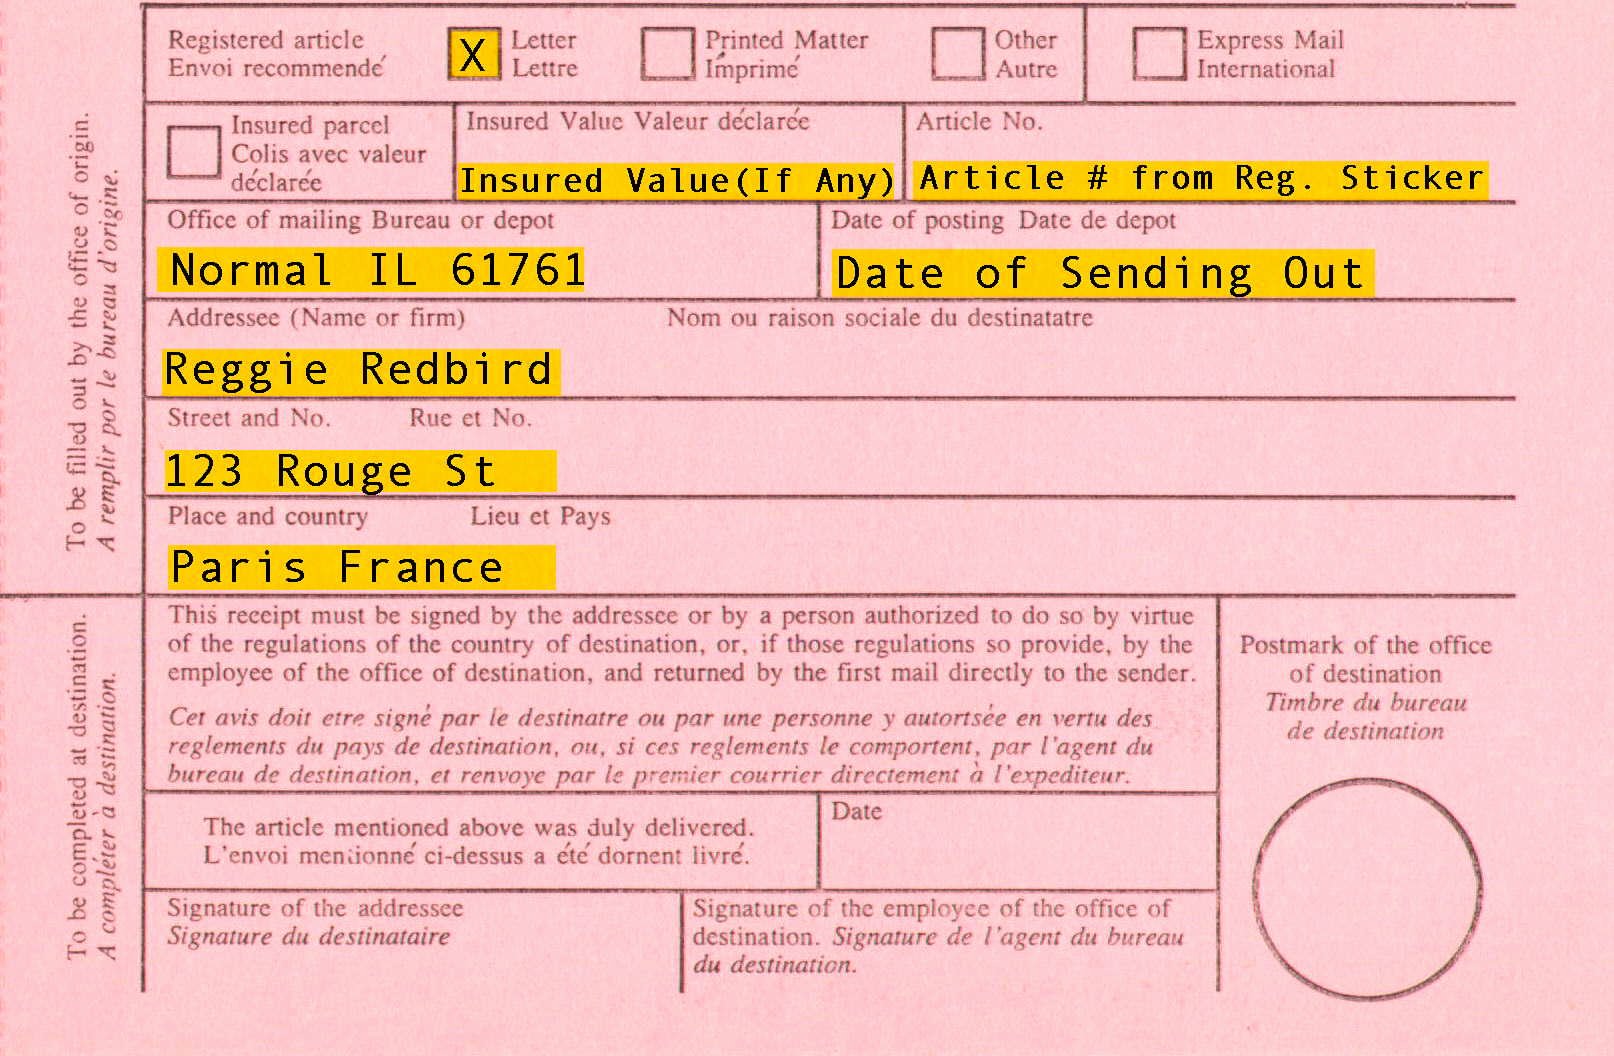 How to Fill Out Receipt Fresh Registered Mail Information